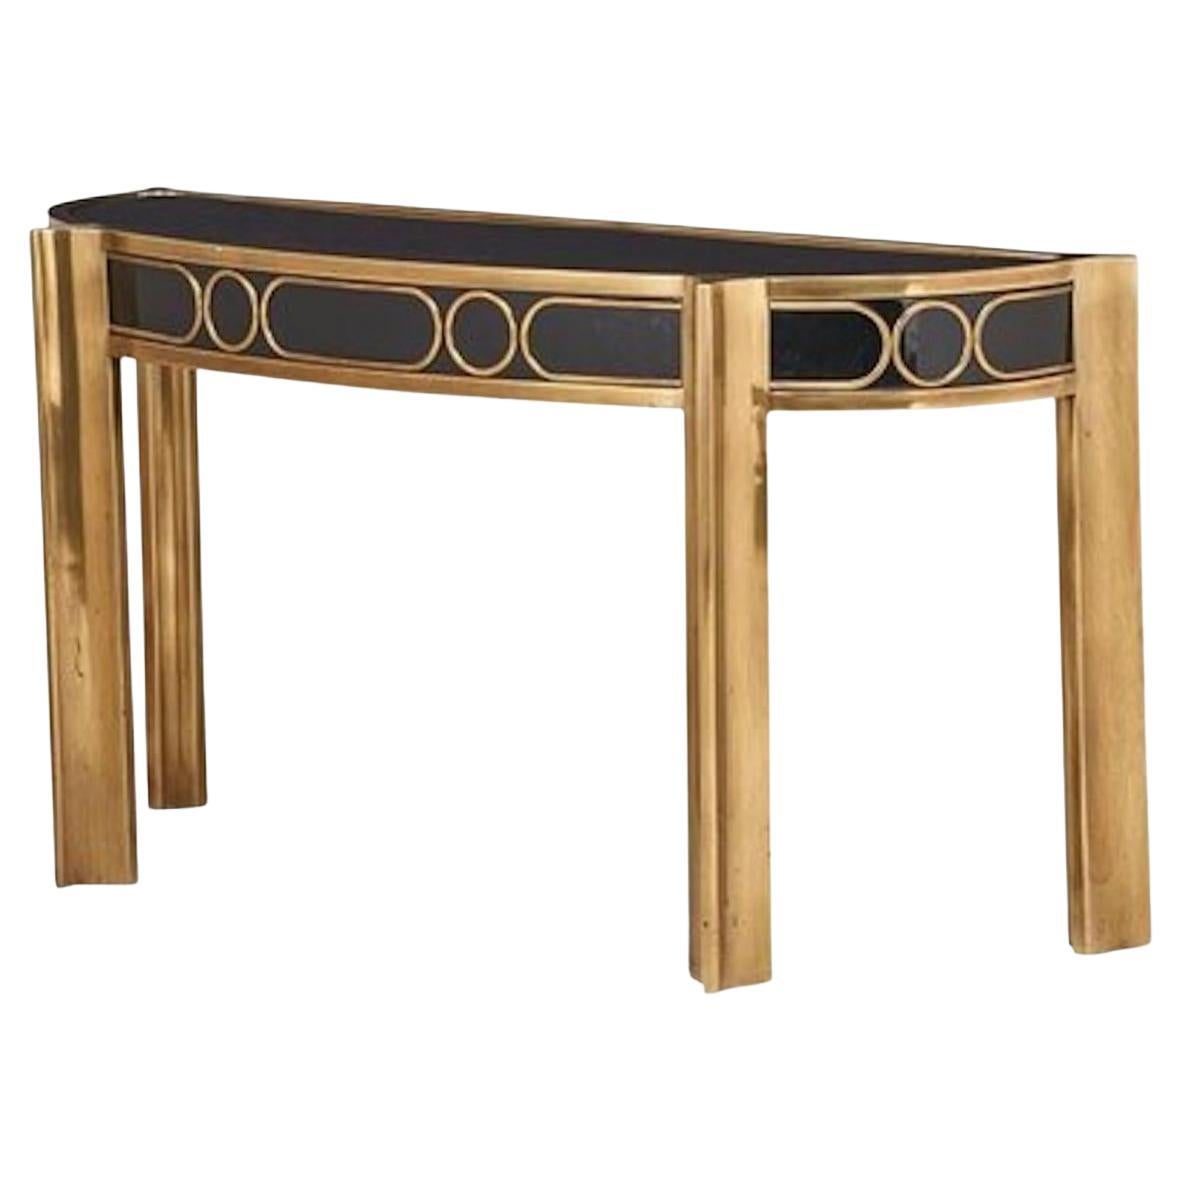 Mastercraft Demilune Brass and Black Lacquer Console Table from 1970s